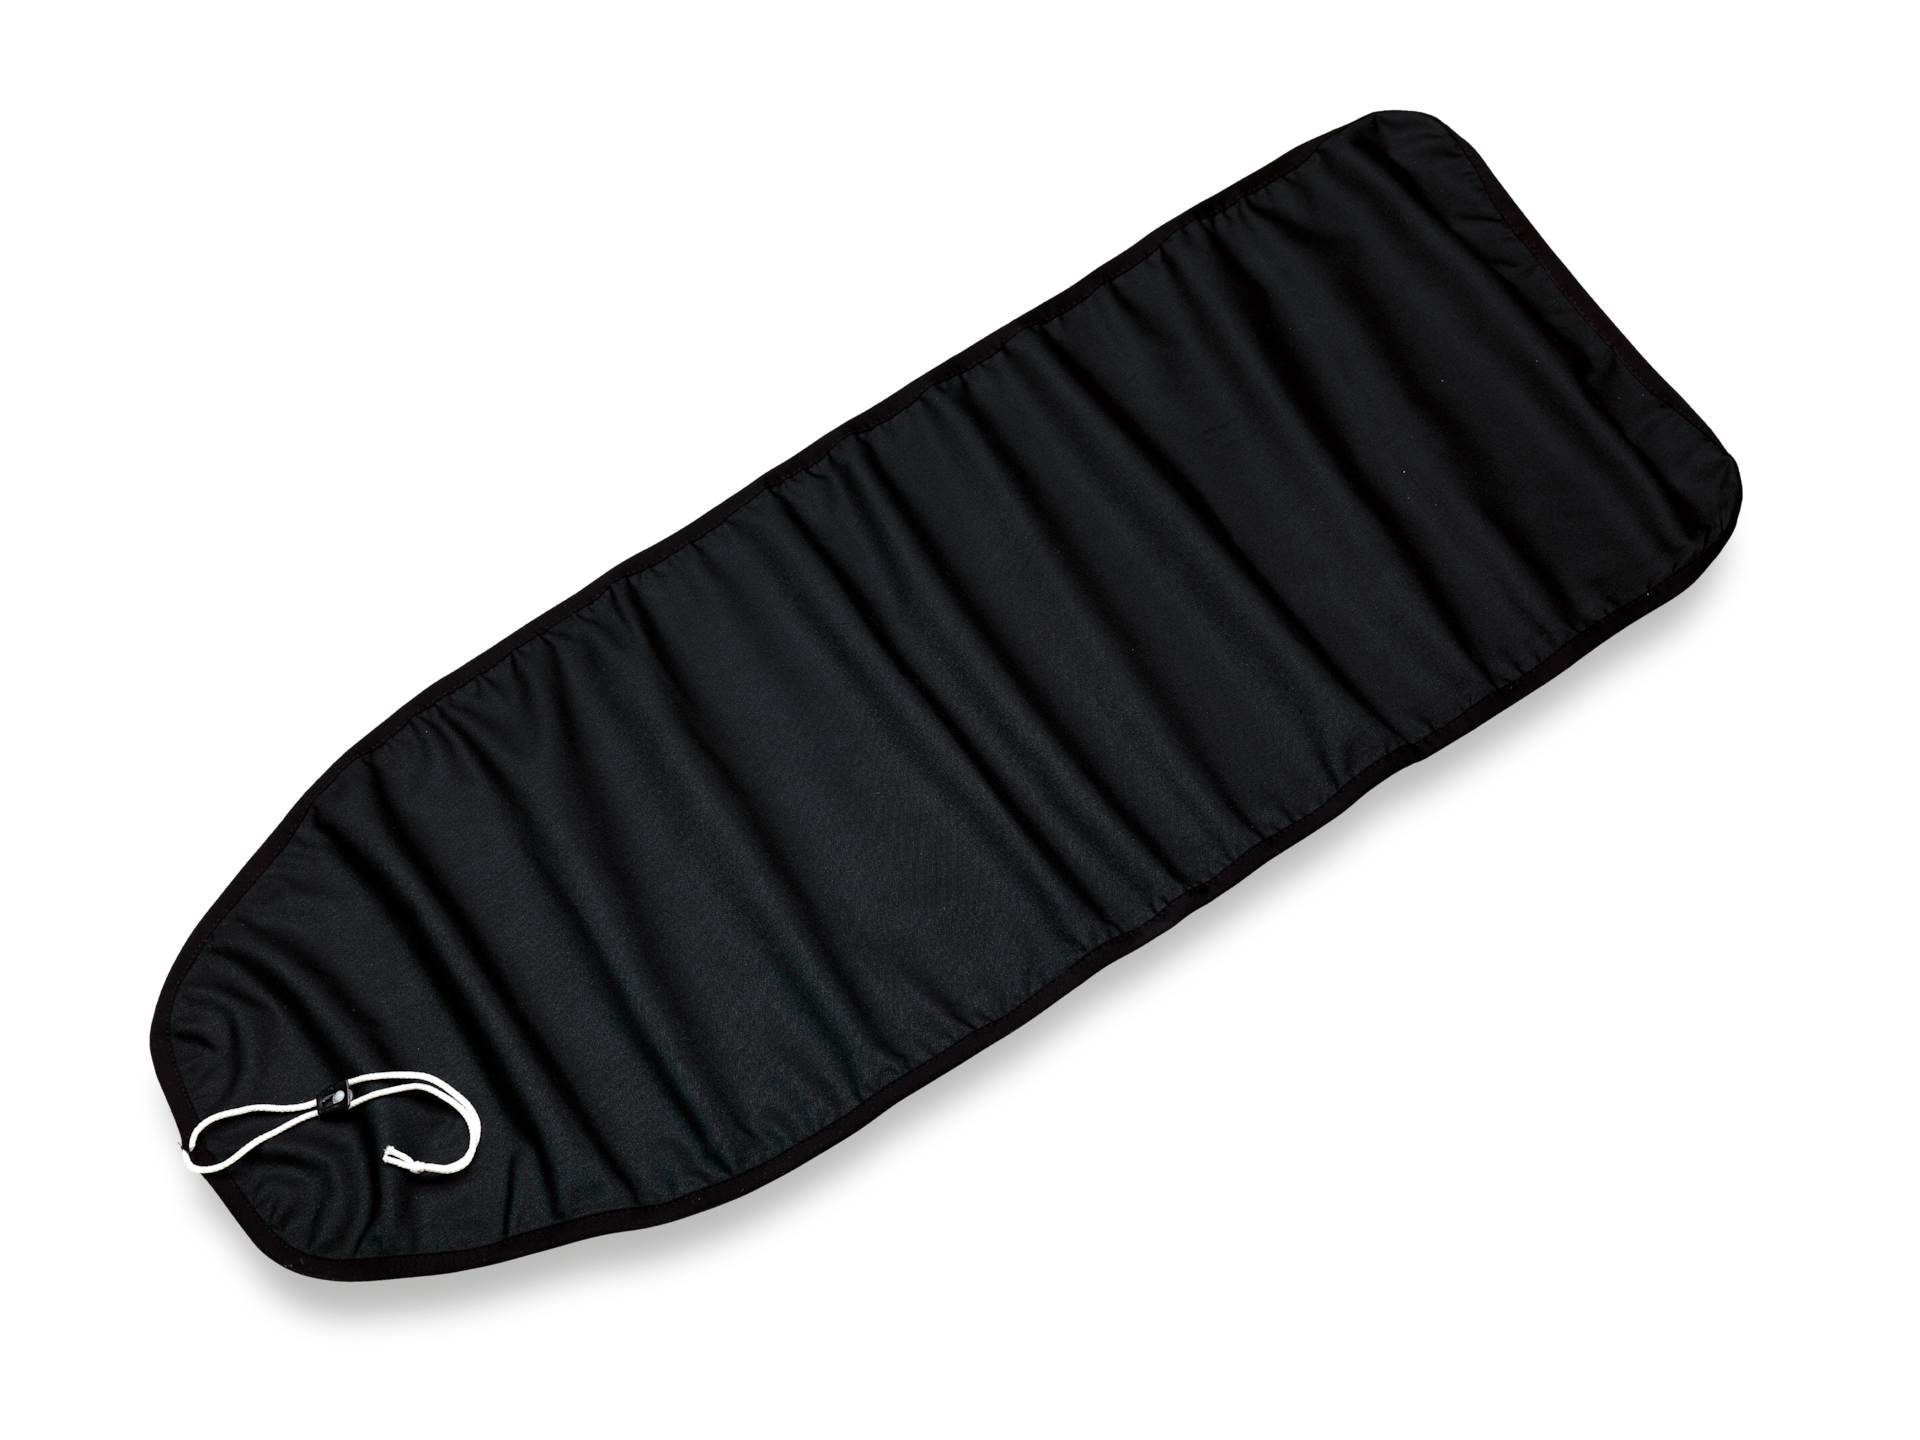 Spare parts - Domestic - Ironing board cover black - 2